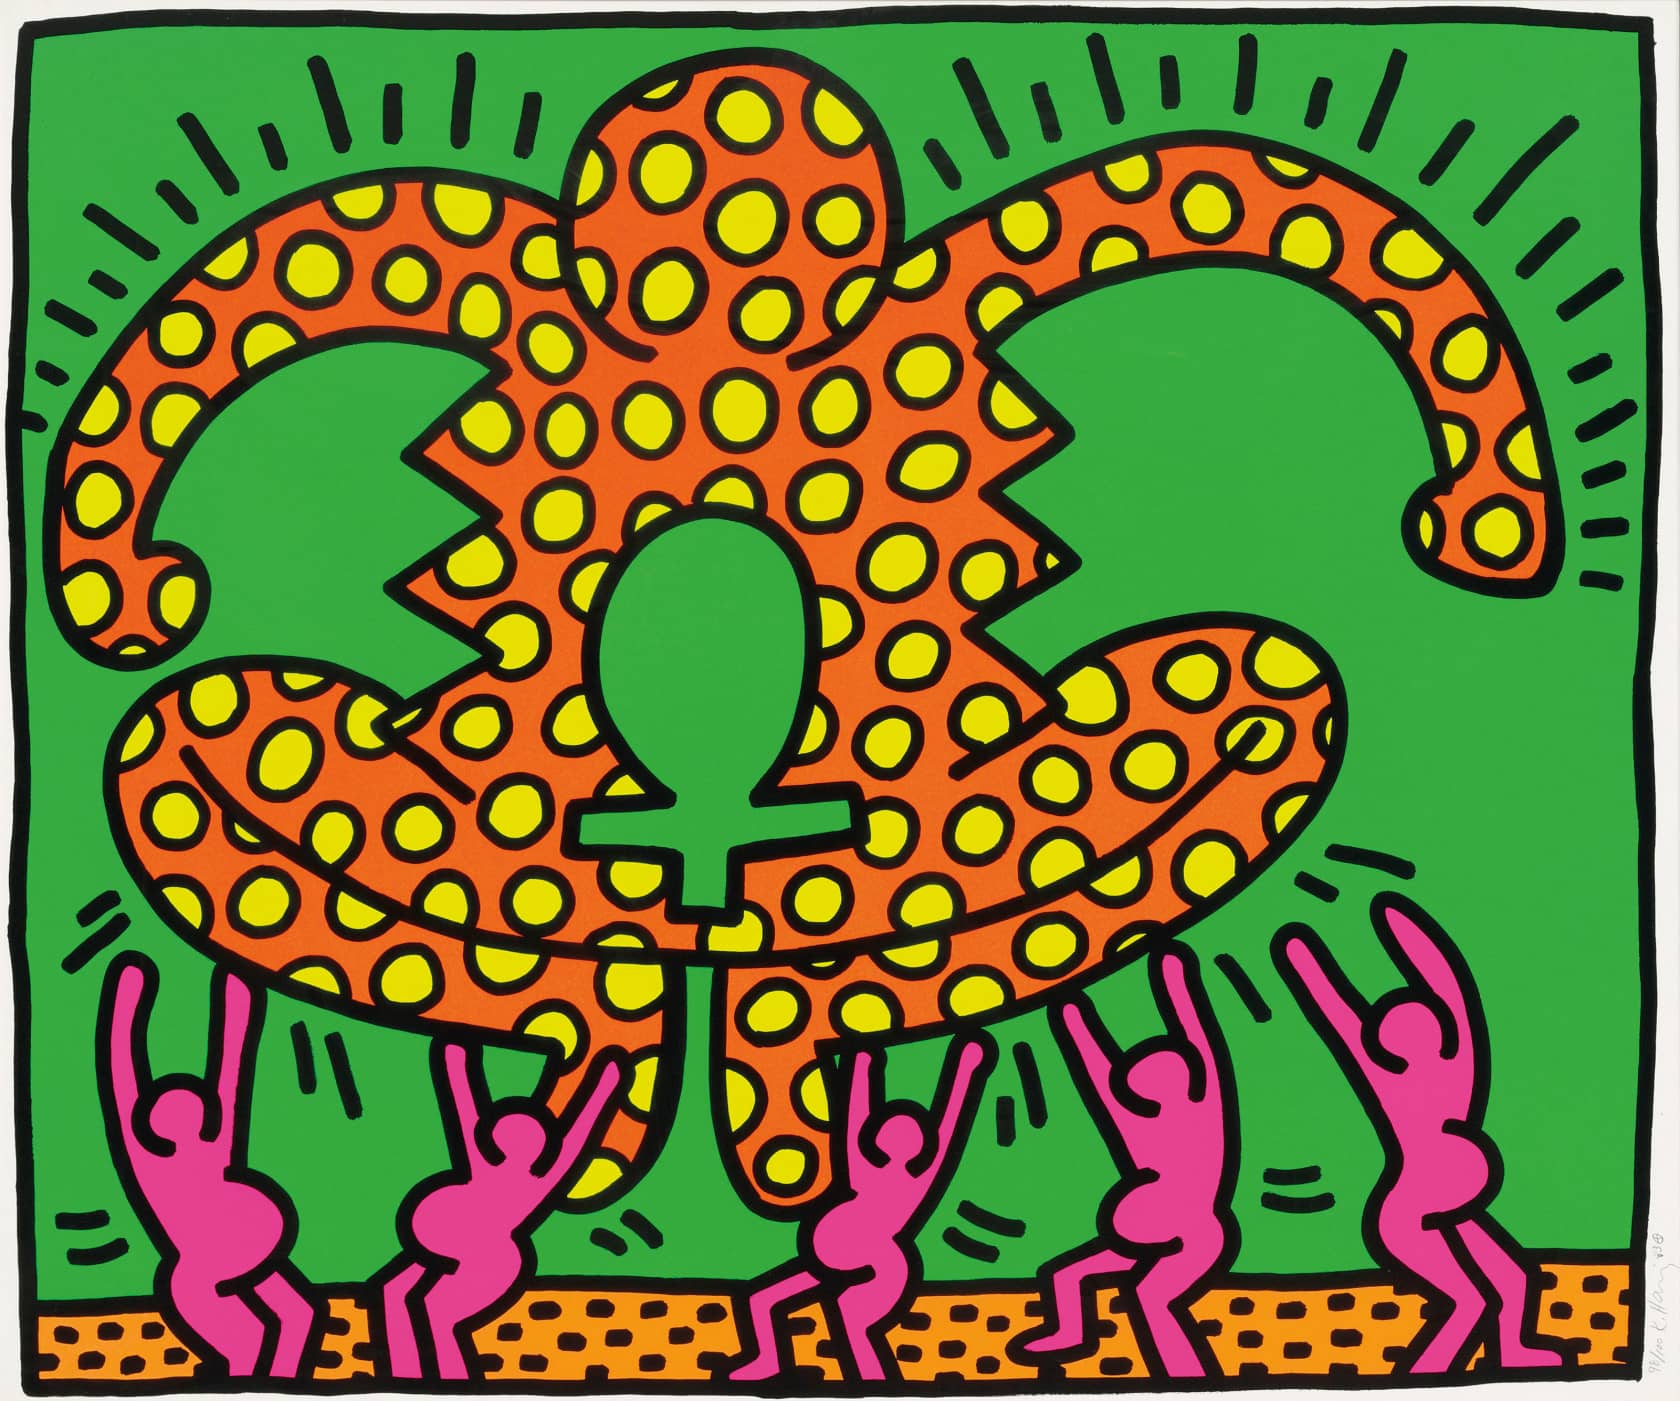 Keith Haring Fertility Suite, Untitled 5 Screenprint